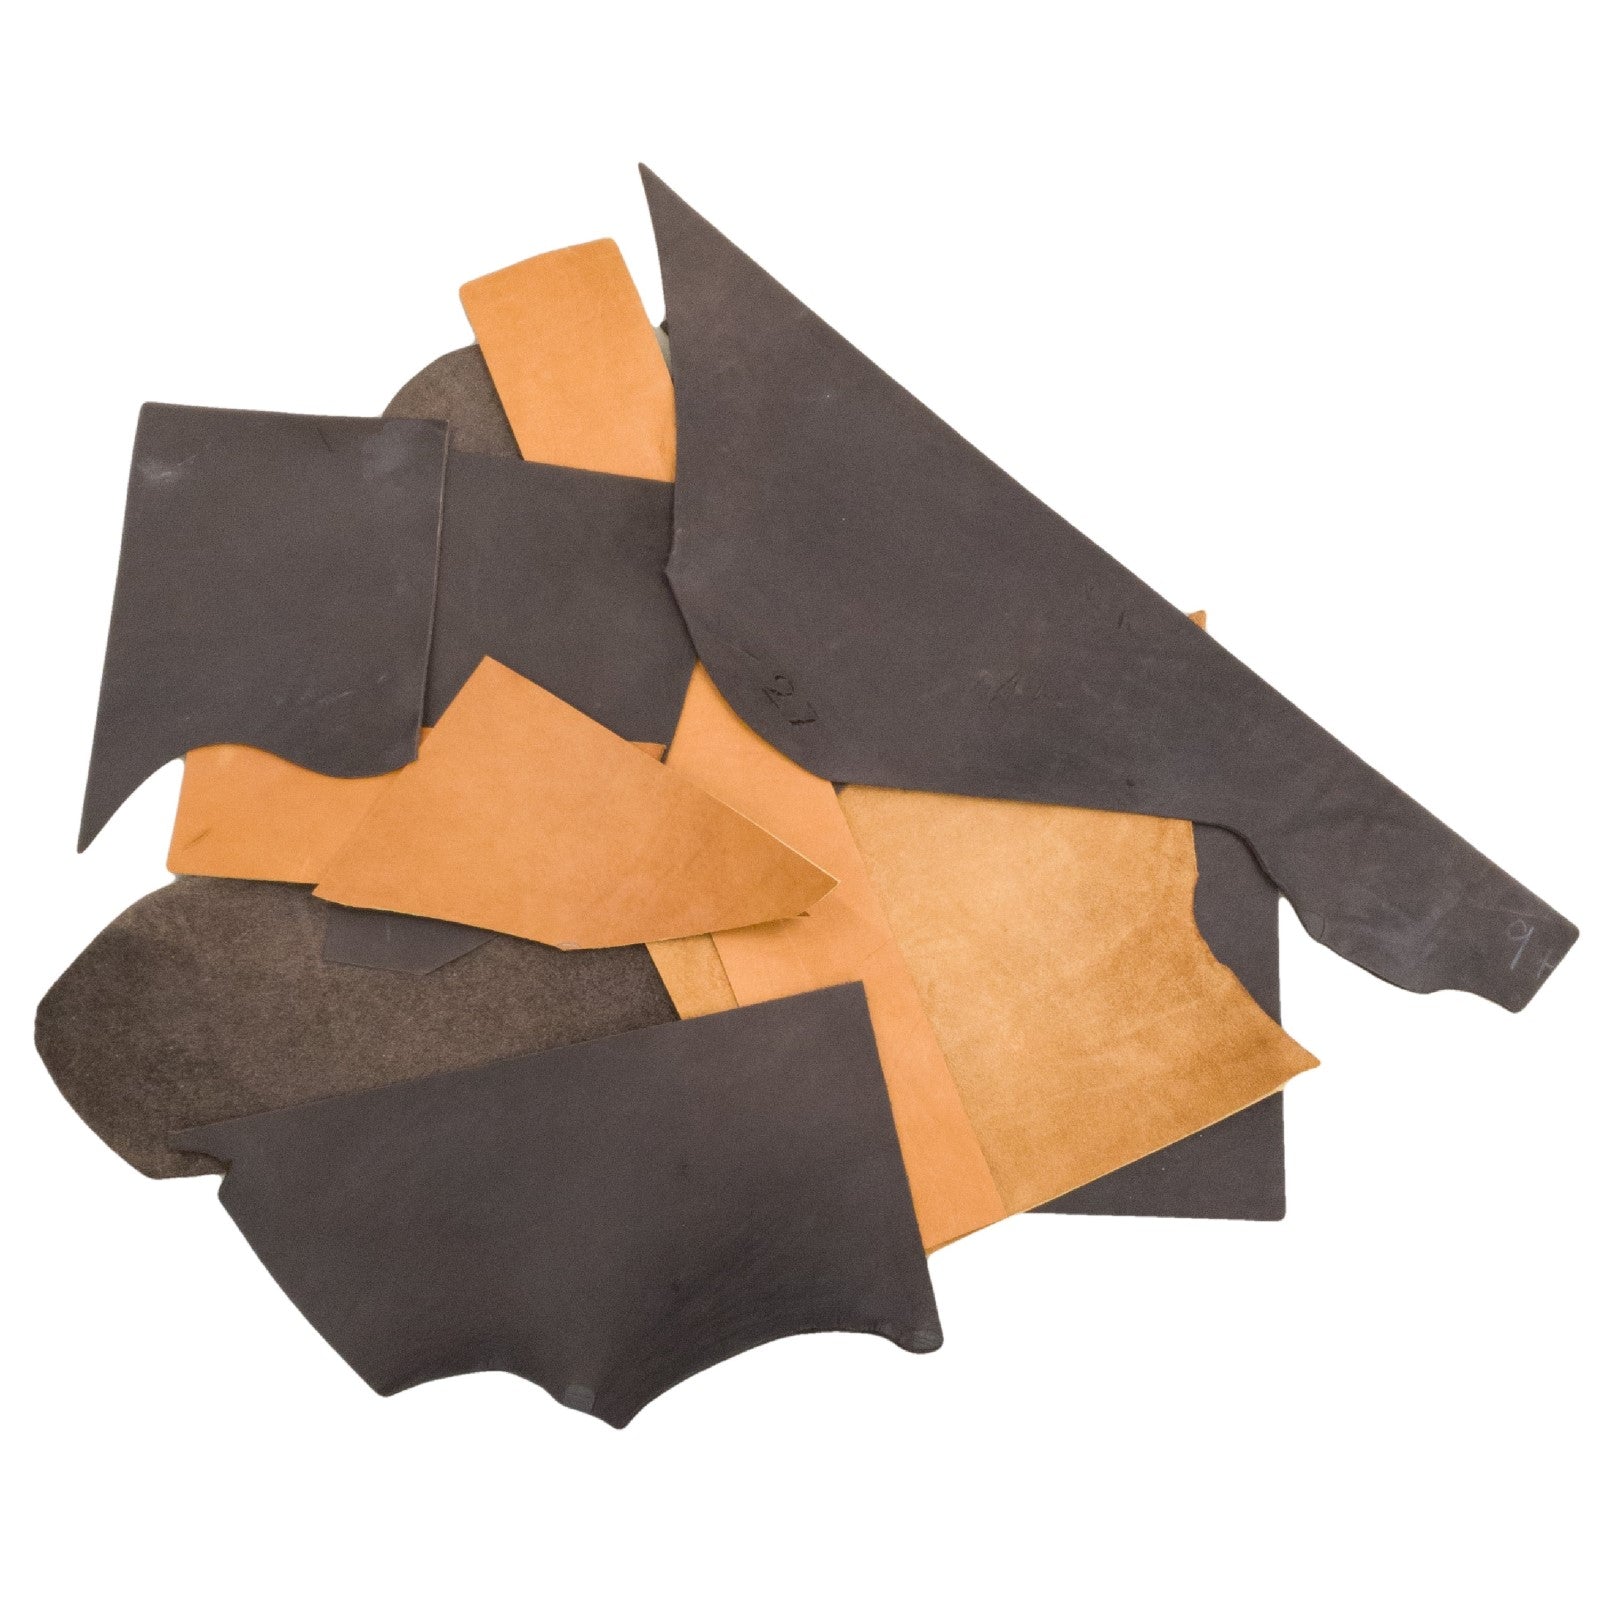 Cow Leather Small Scrap Brown Mix Heavy hide pieces 1 pound Bag,  | The Leather Guy